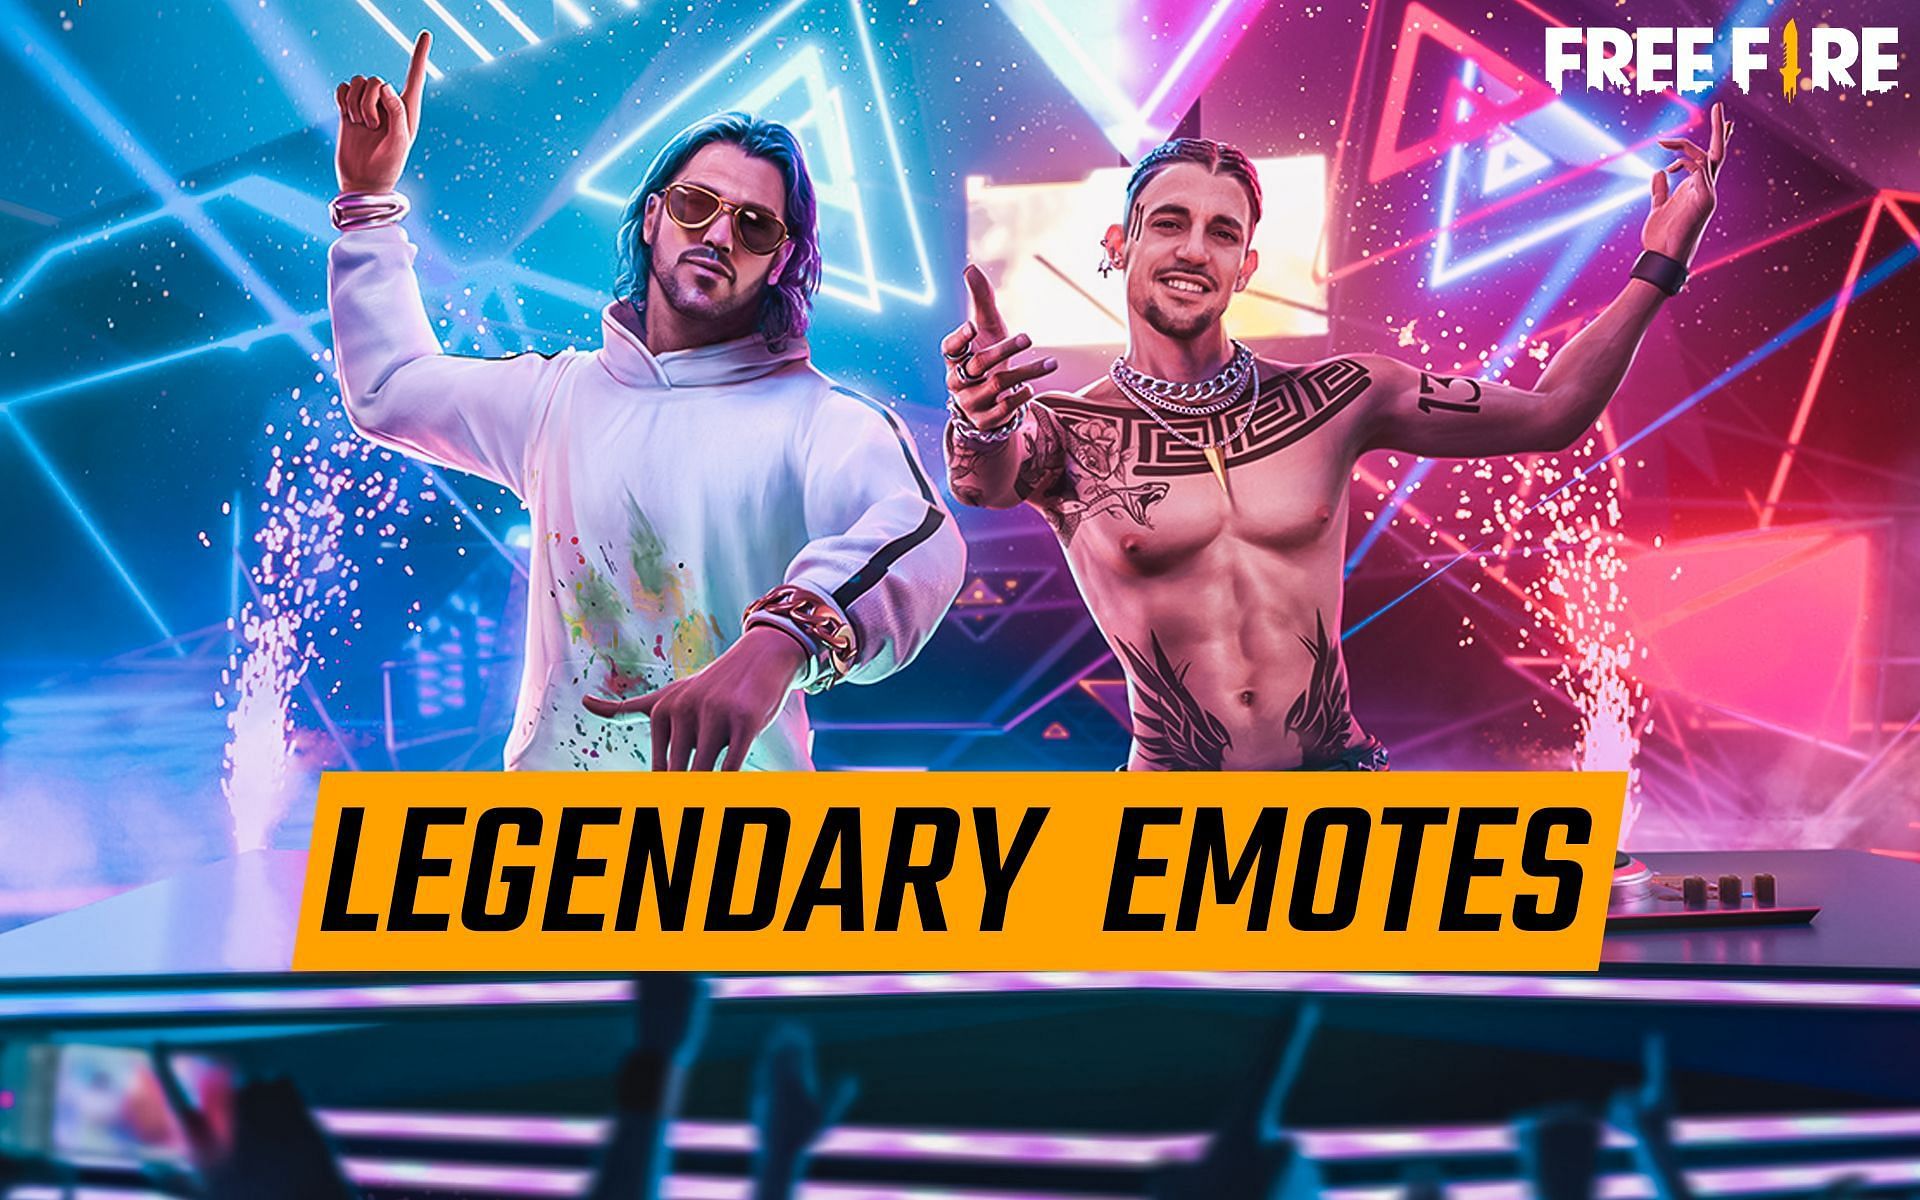 The best Legendary emotes in Free Fire as of November 2021 (Image via Free Fire)